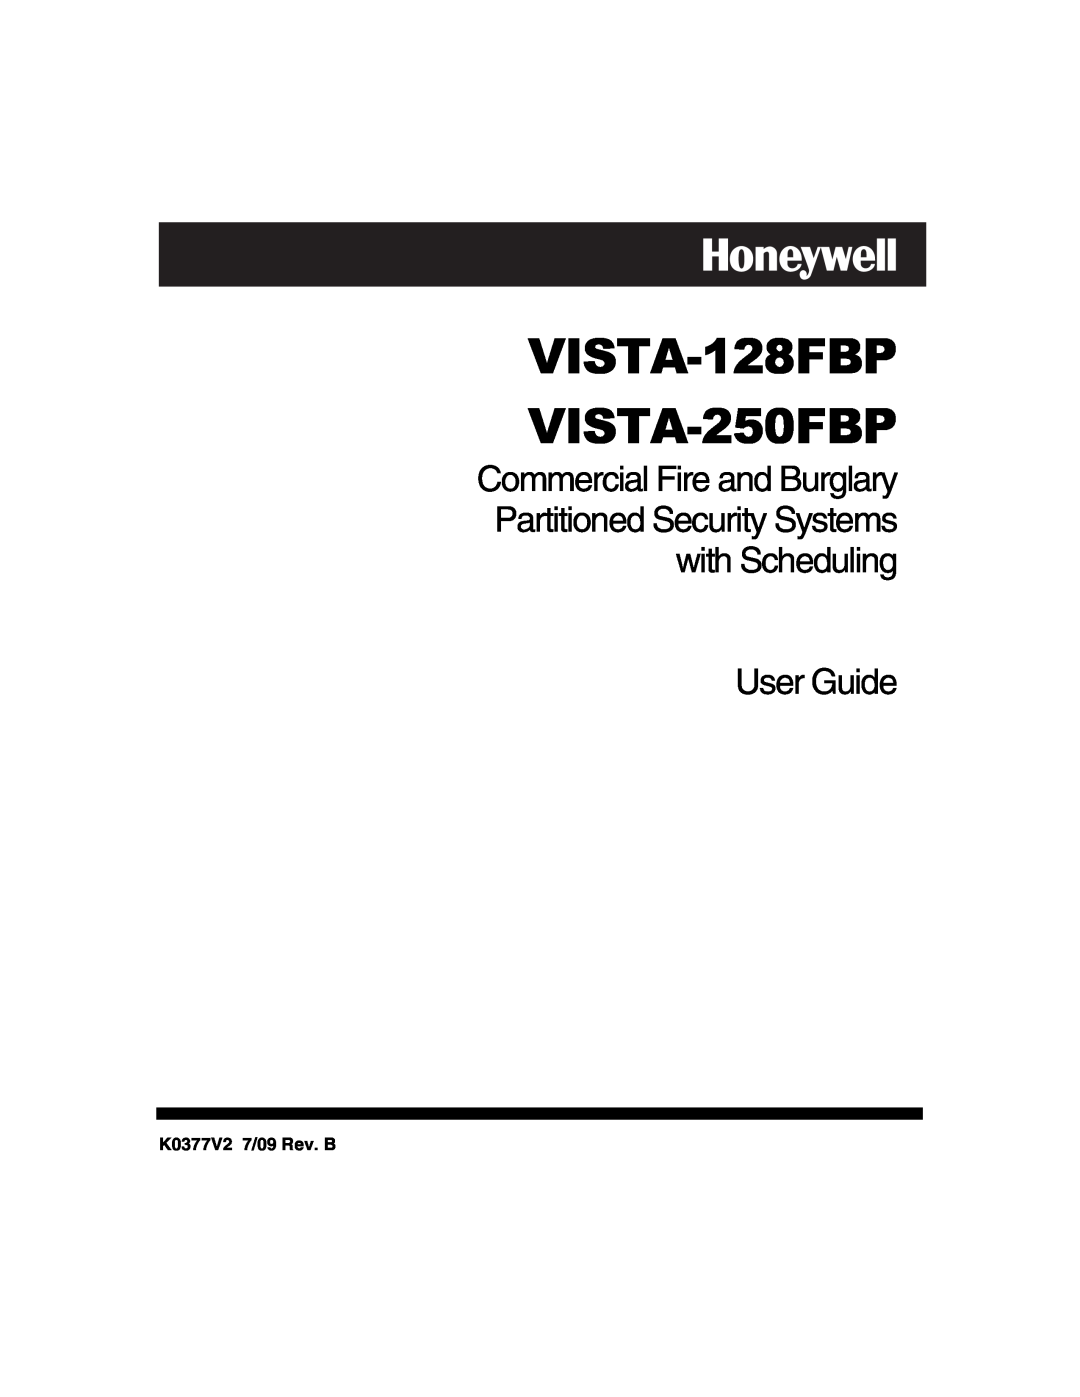 Honeywell manual VISTA-128FBP VISTA-250FBP, Commercial Fire and Burglary, Partitioned Security Systems with Scheduling 